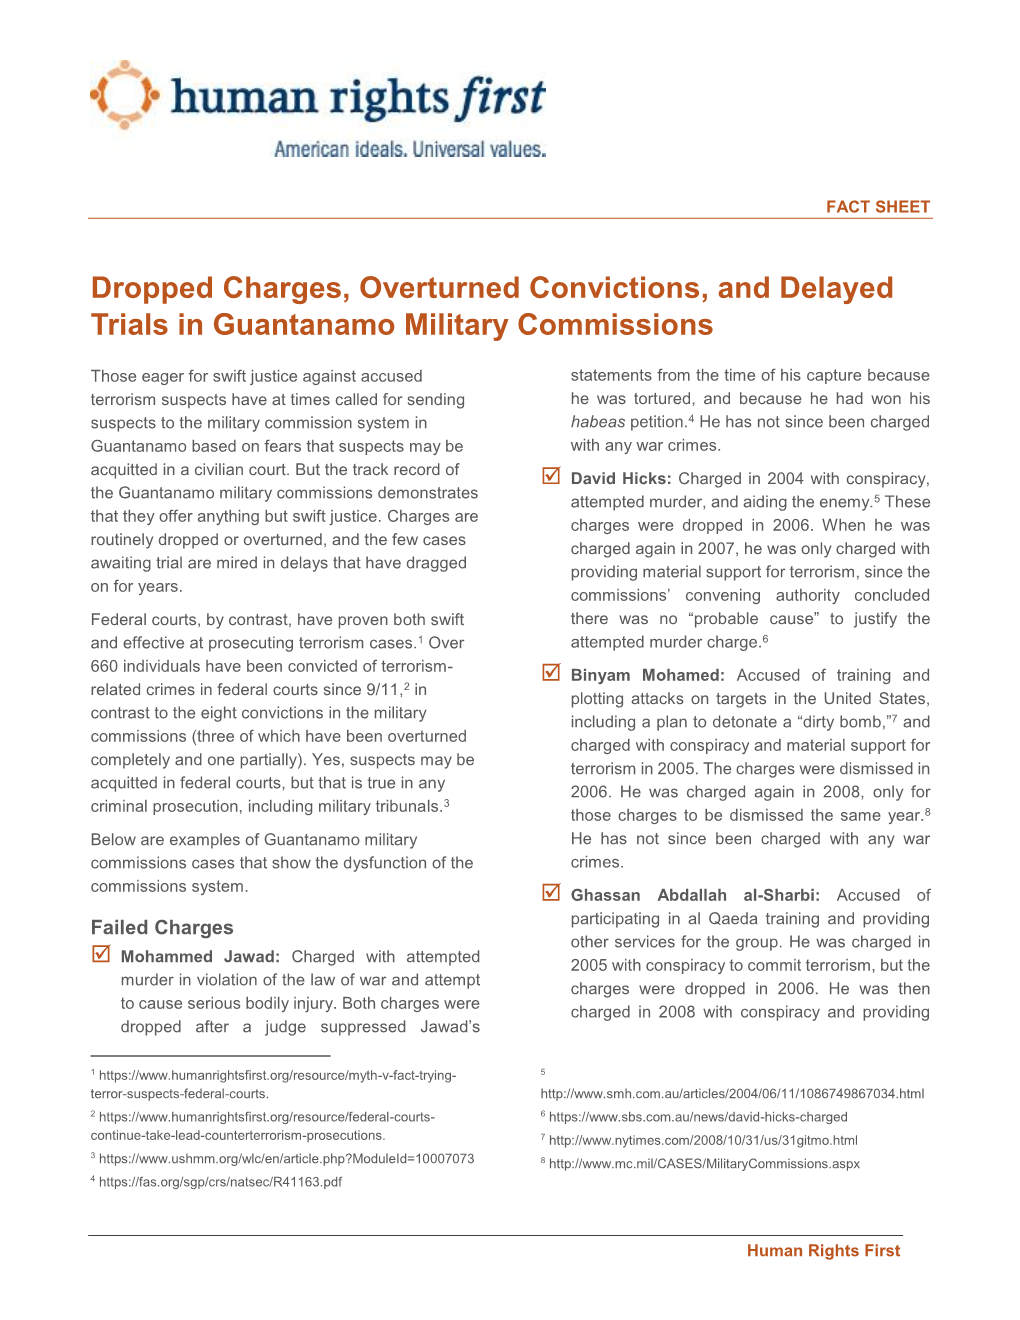 Dropped Charges, Overturned Convictions, and Delayed Trials in Guantanamo Military Commissions